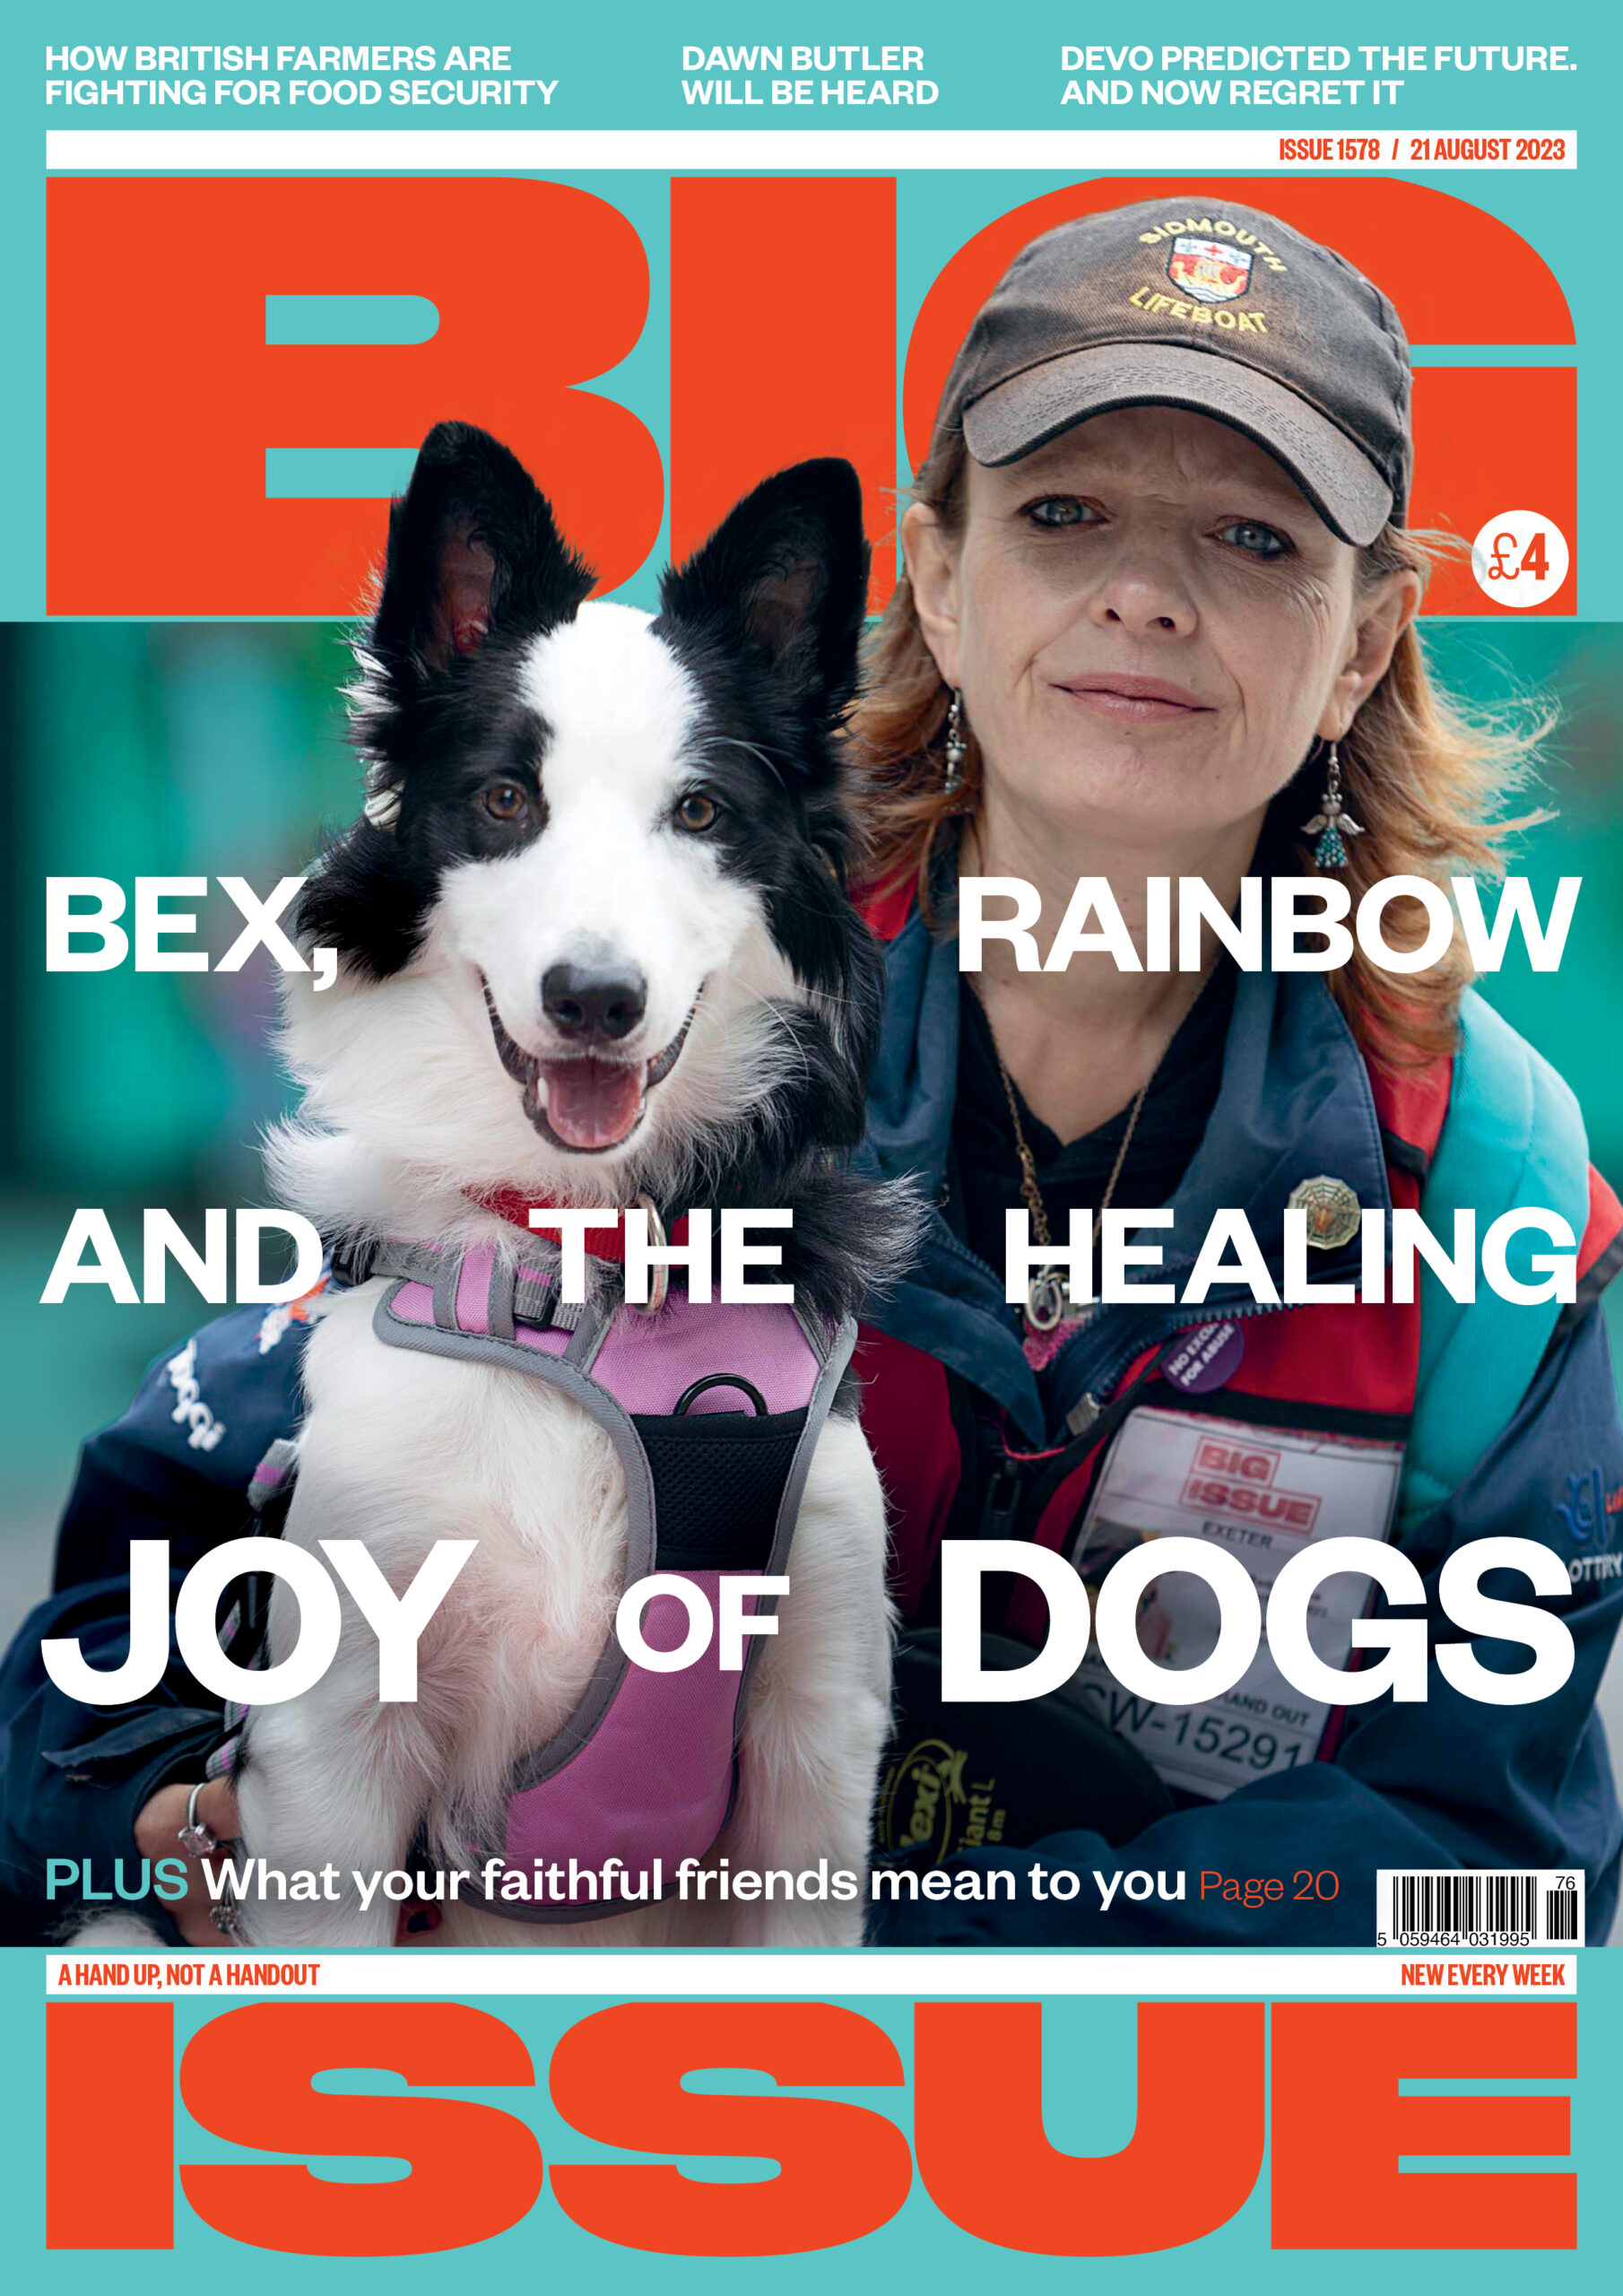 Big Issue issue 1578 cover - featuring vendor Bex and her dog Rainbow